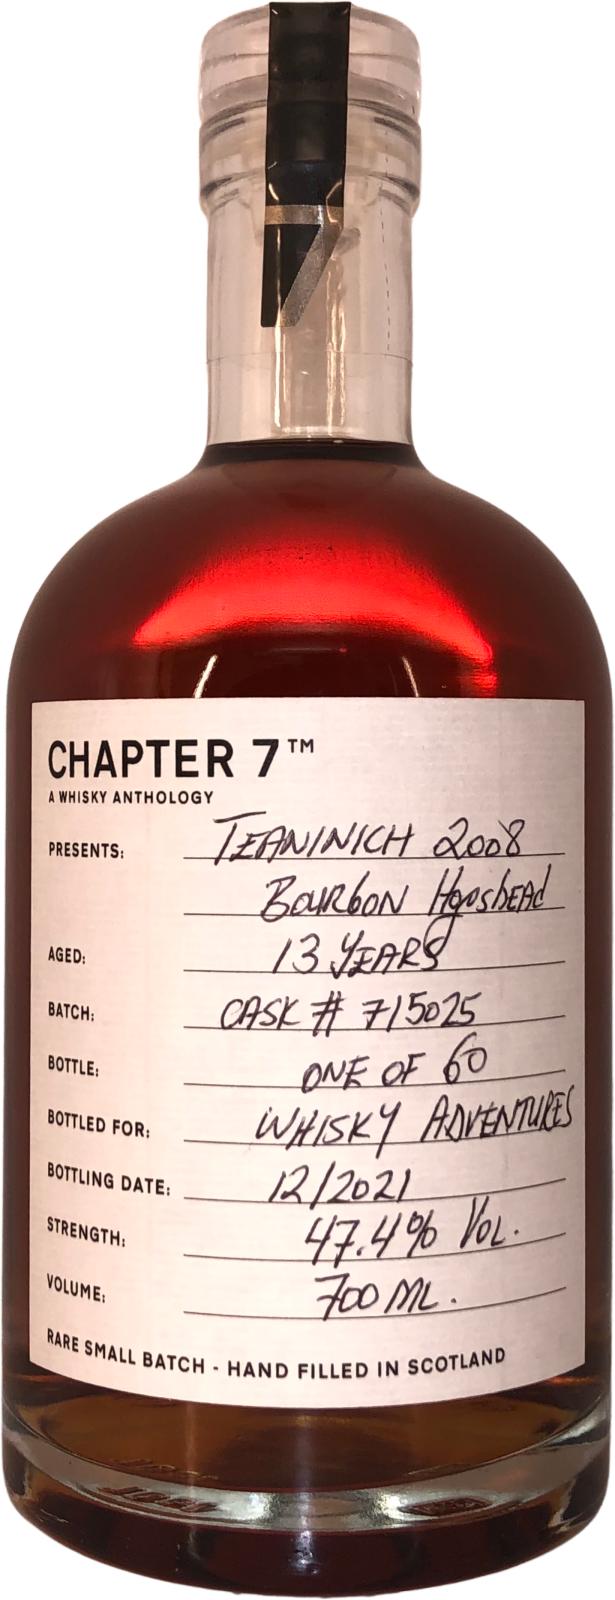 Teaninich　reviews　Whiskybase　2008　Ratings　Ch7　and